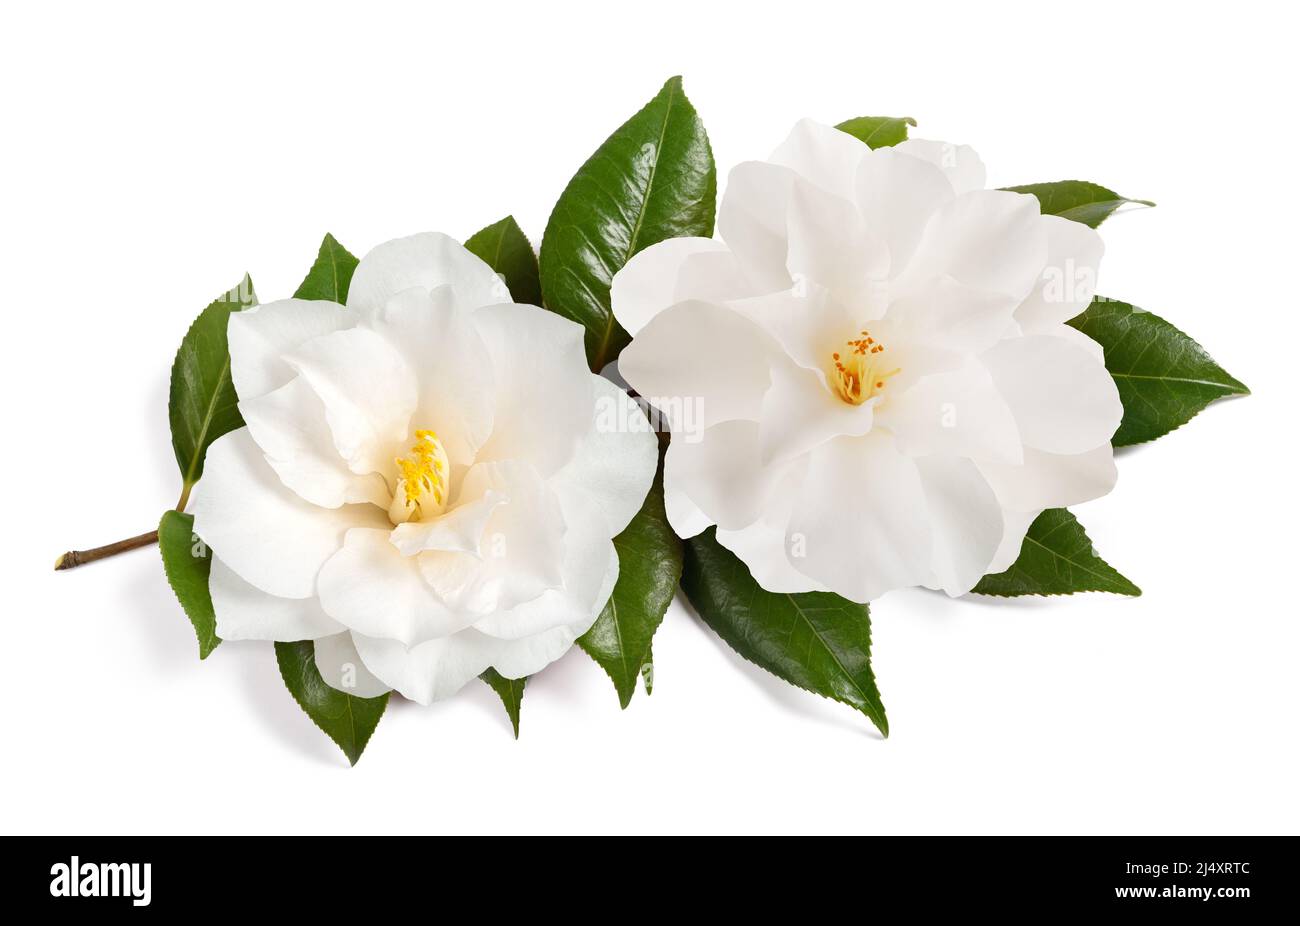 Camellia branch with flowers isolated on white background Stock Photo